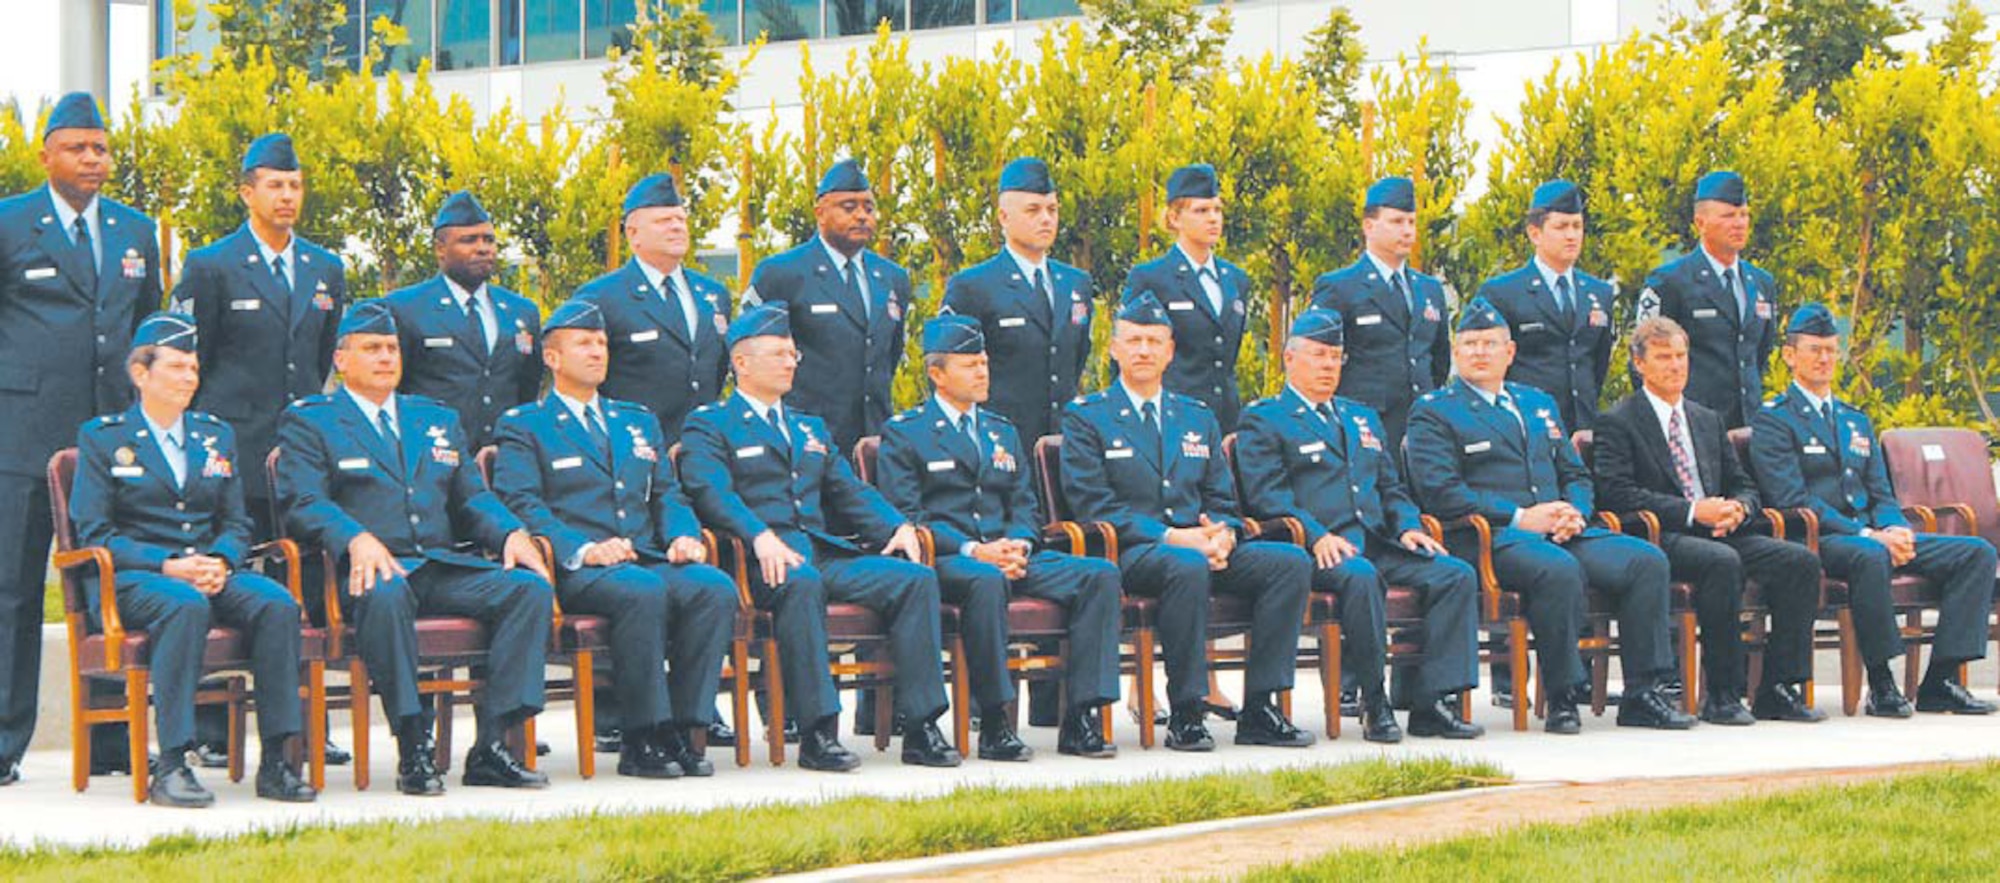 The new wing and group commanders assemble at the Schriever Space Complex courtyard during the Wing activation ceremony. They are (front row, left to right); Brig. Gen. Ellen Pawlikowski, Military Satellite Communications Systems Wing commander; Col. David O?Brian, representing Brig. Gen. (s) Edward Bolton, Launch and Range Systems Wing commander; Col. Allan Ballenger, Global Positioning Systems Wing commander; Col. Randall Weidenheimer, Space Based Infrared Systems Wing commander; Col. Michael Taylor, Space Superiority Systems Wing commander; Col. Richard White, Space Development and Test Wing commander; Col. John Wagner, Defense Meteorological Satellite Program Systems Group commander; Col. Michael Coolidge, Satellite Control and Network Systems Group commander; Mr. Lou Johnson, Space Logistics Group director; and Col. Joseph Schwarz, 61st Air Base Wing commander. Their Senior NCOs stand solidly behind them.